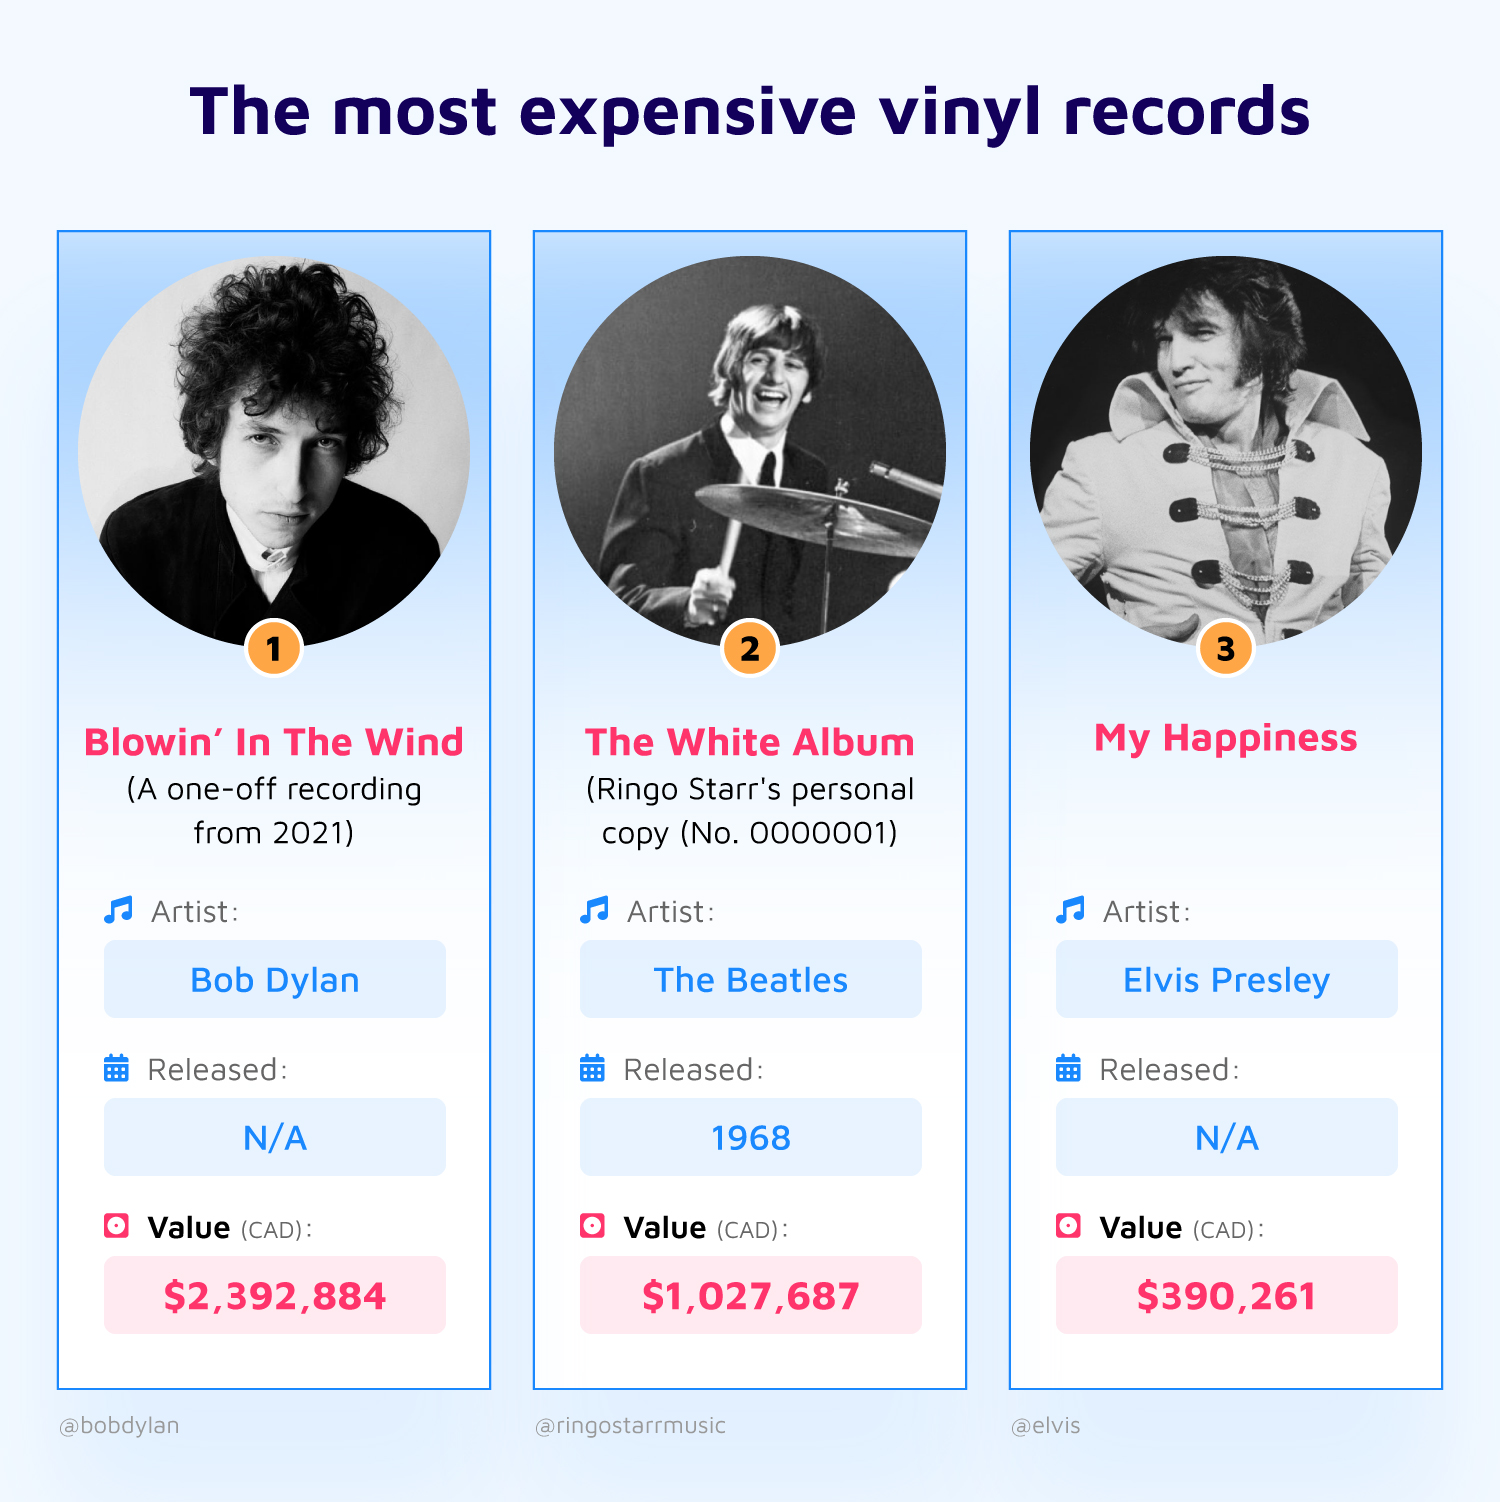 Top 3 Most Expensive Vinyl Records